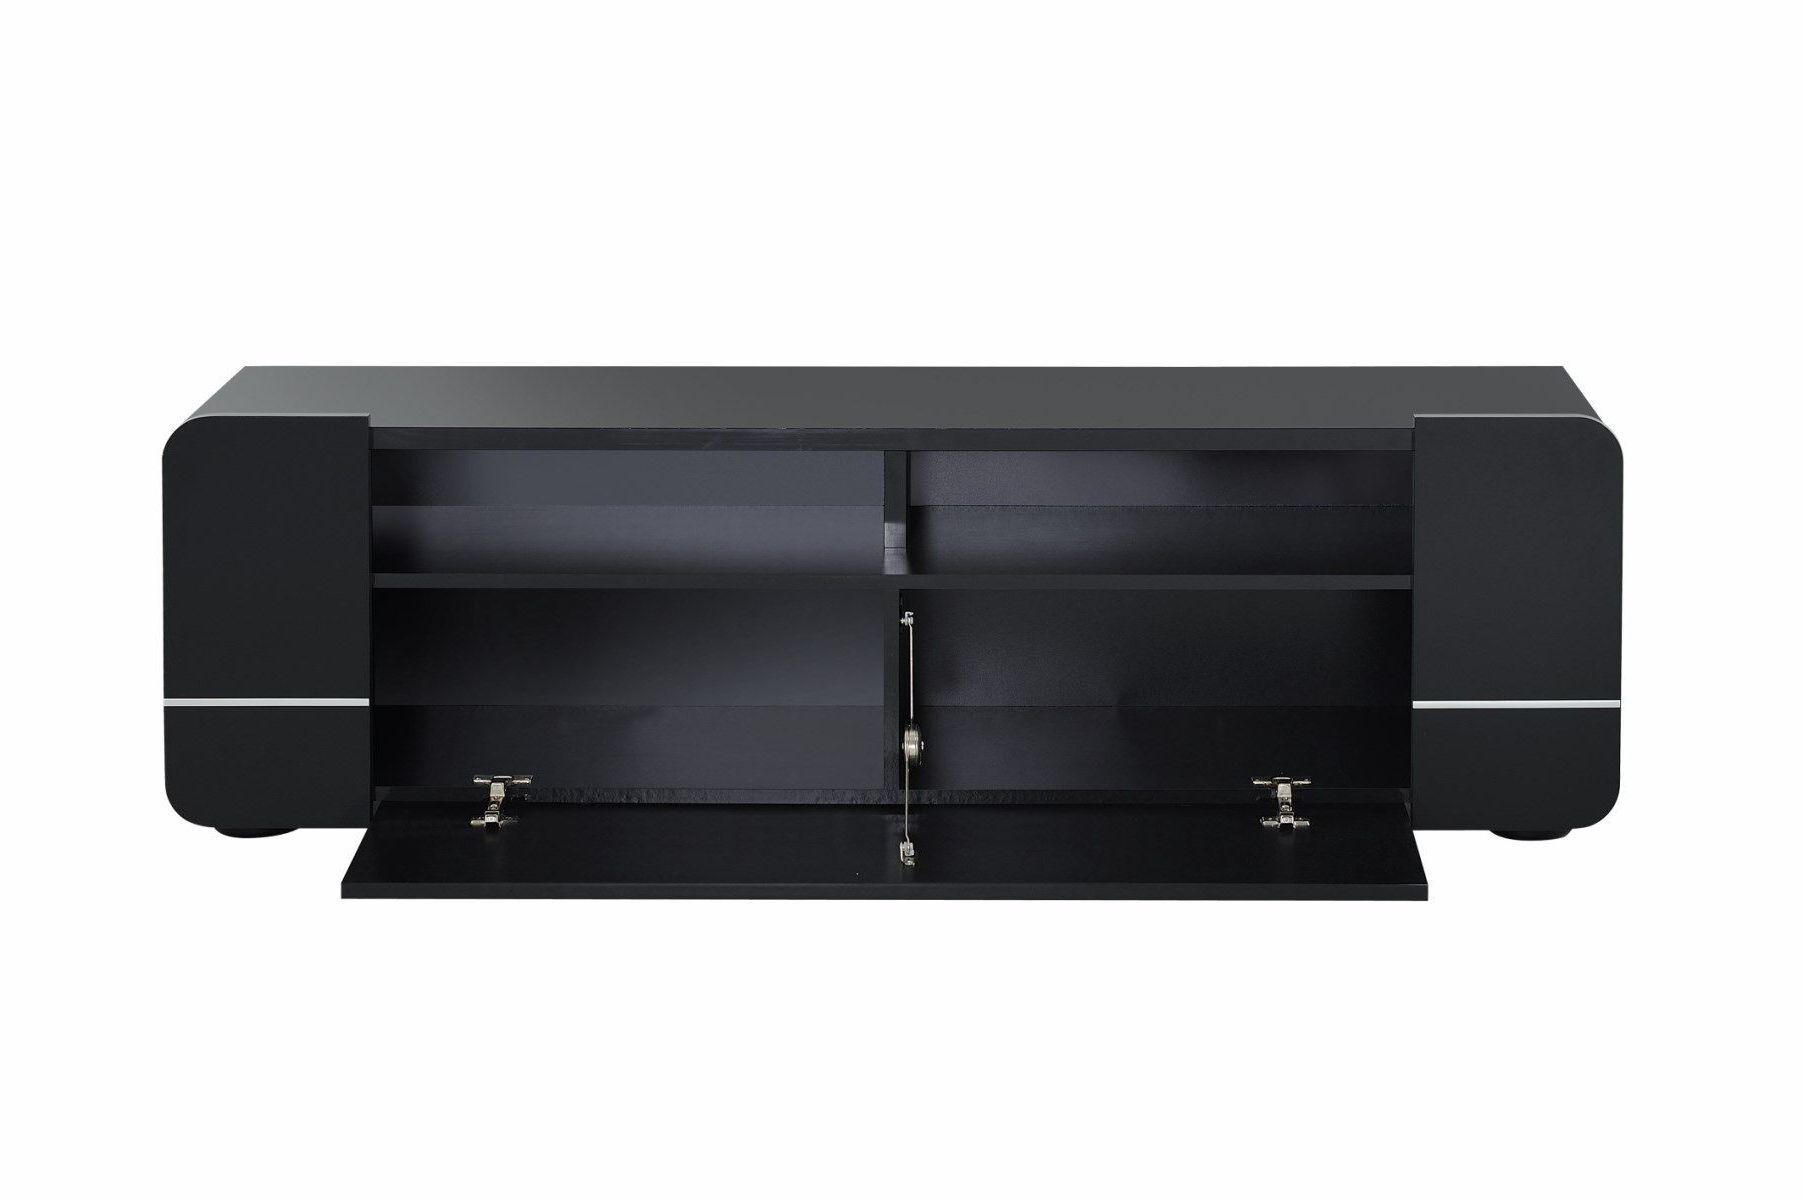 150cm Tv Units With Regard To Well Liked Buy Courbe Black Gloss Tv Unit With Cupboard 150cm (View 15 of 20)